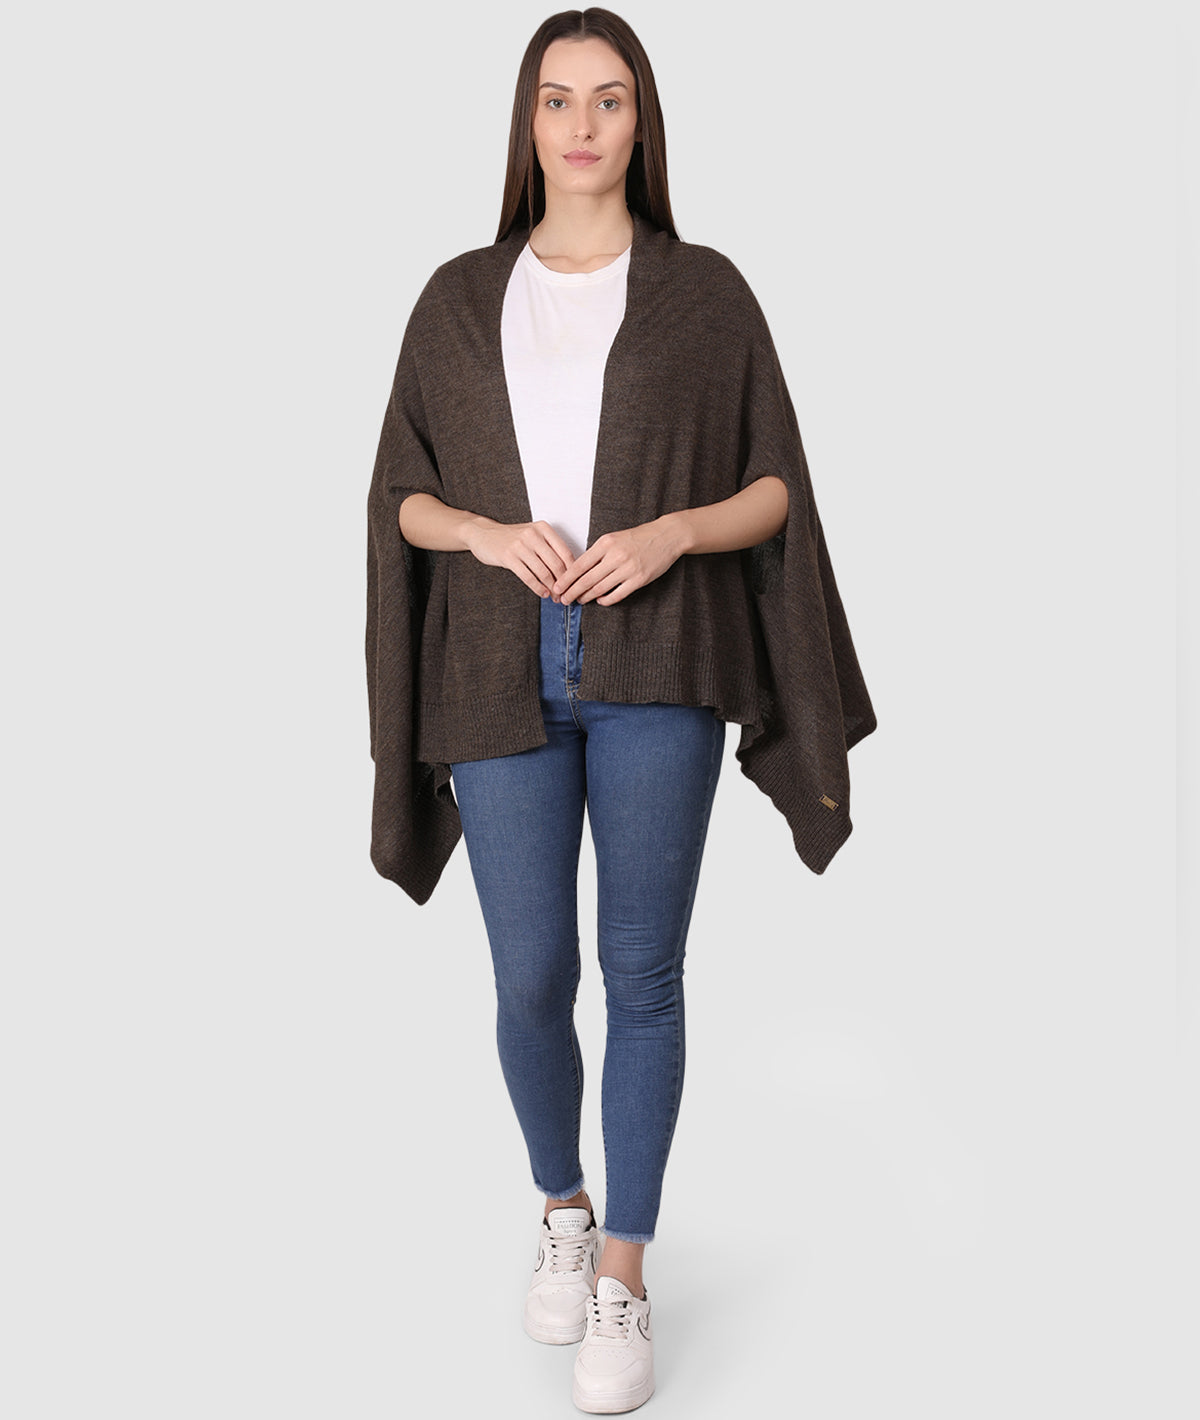 Palma Merino Wool Knitted Fashion Poncho / Cape for Everyday Chic Look (This Size Fits Most) (Dark  Brown)